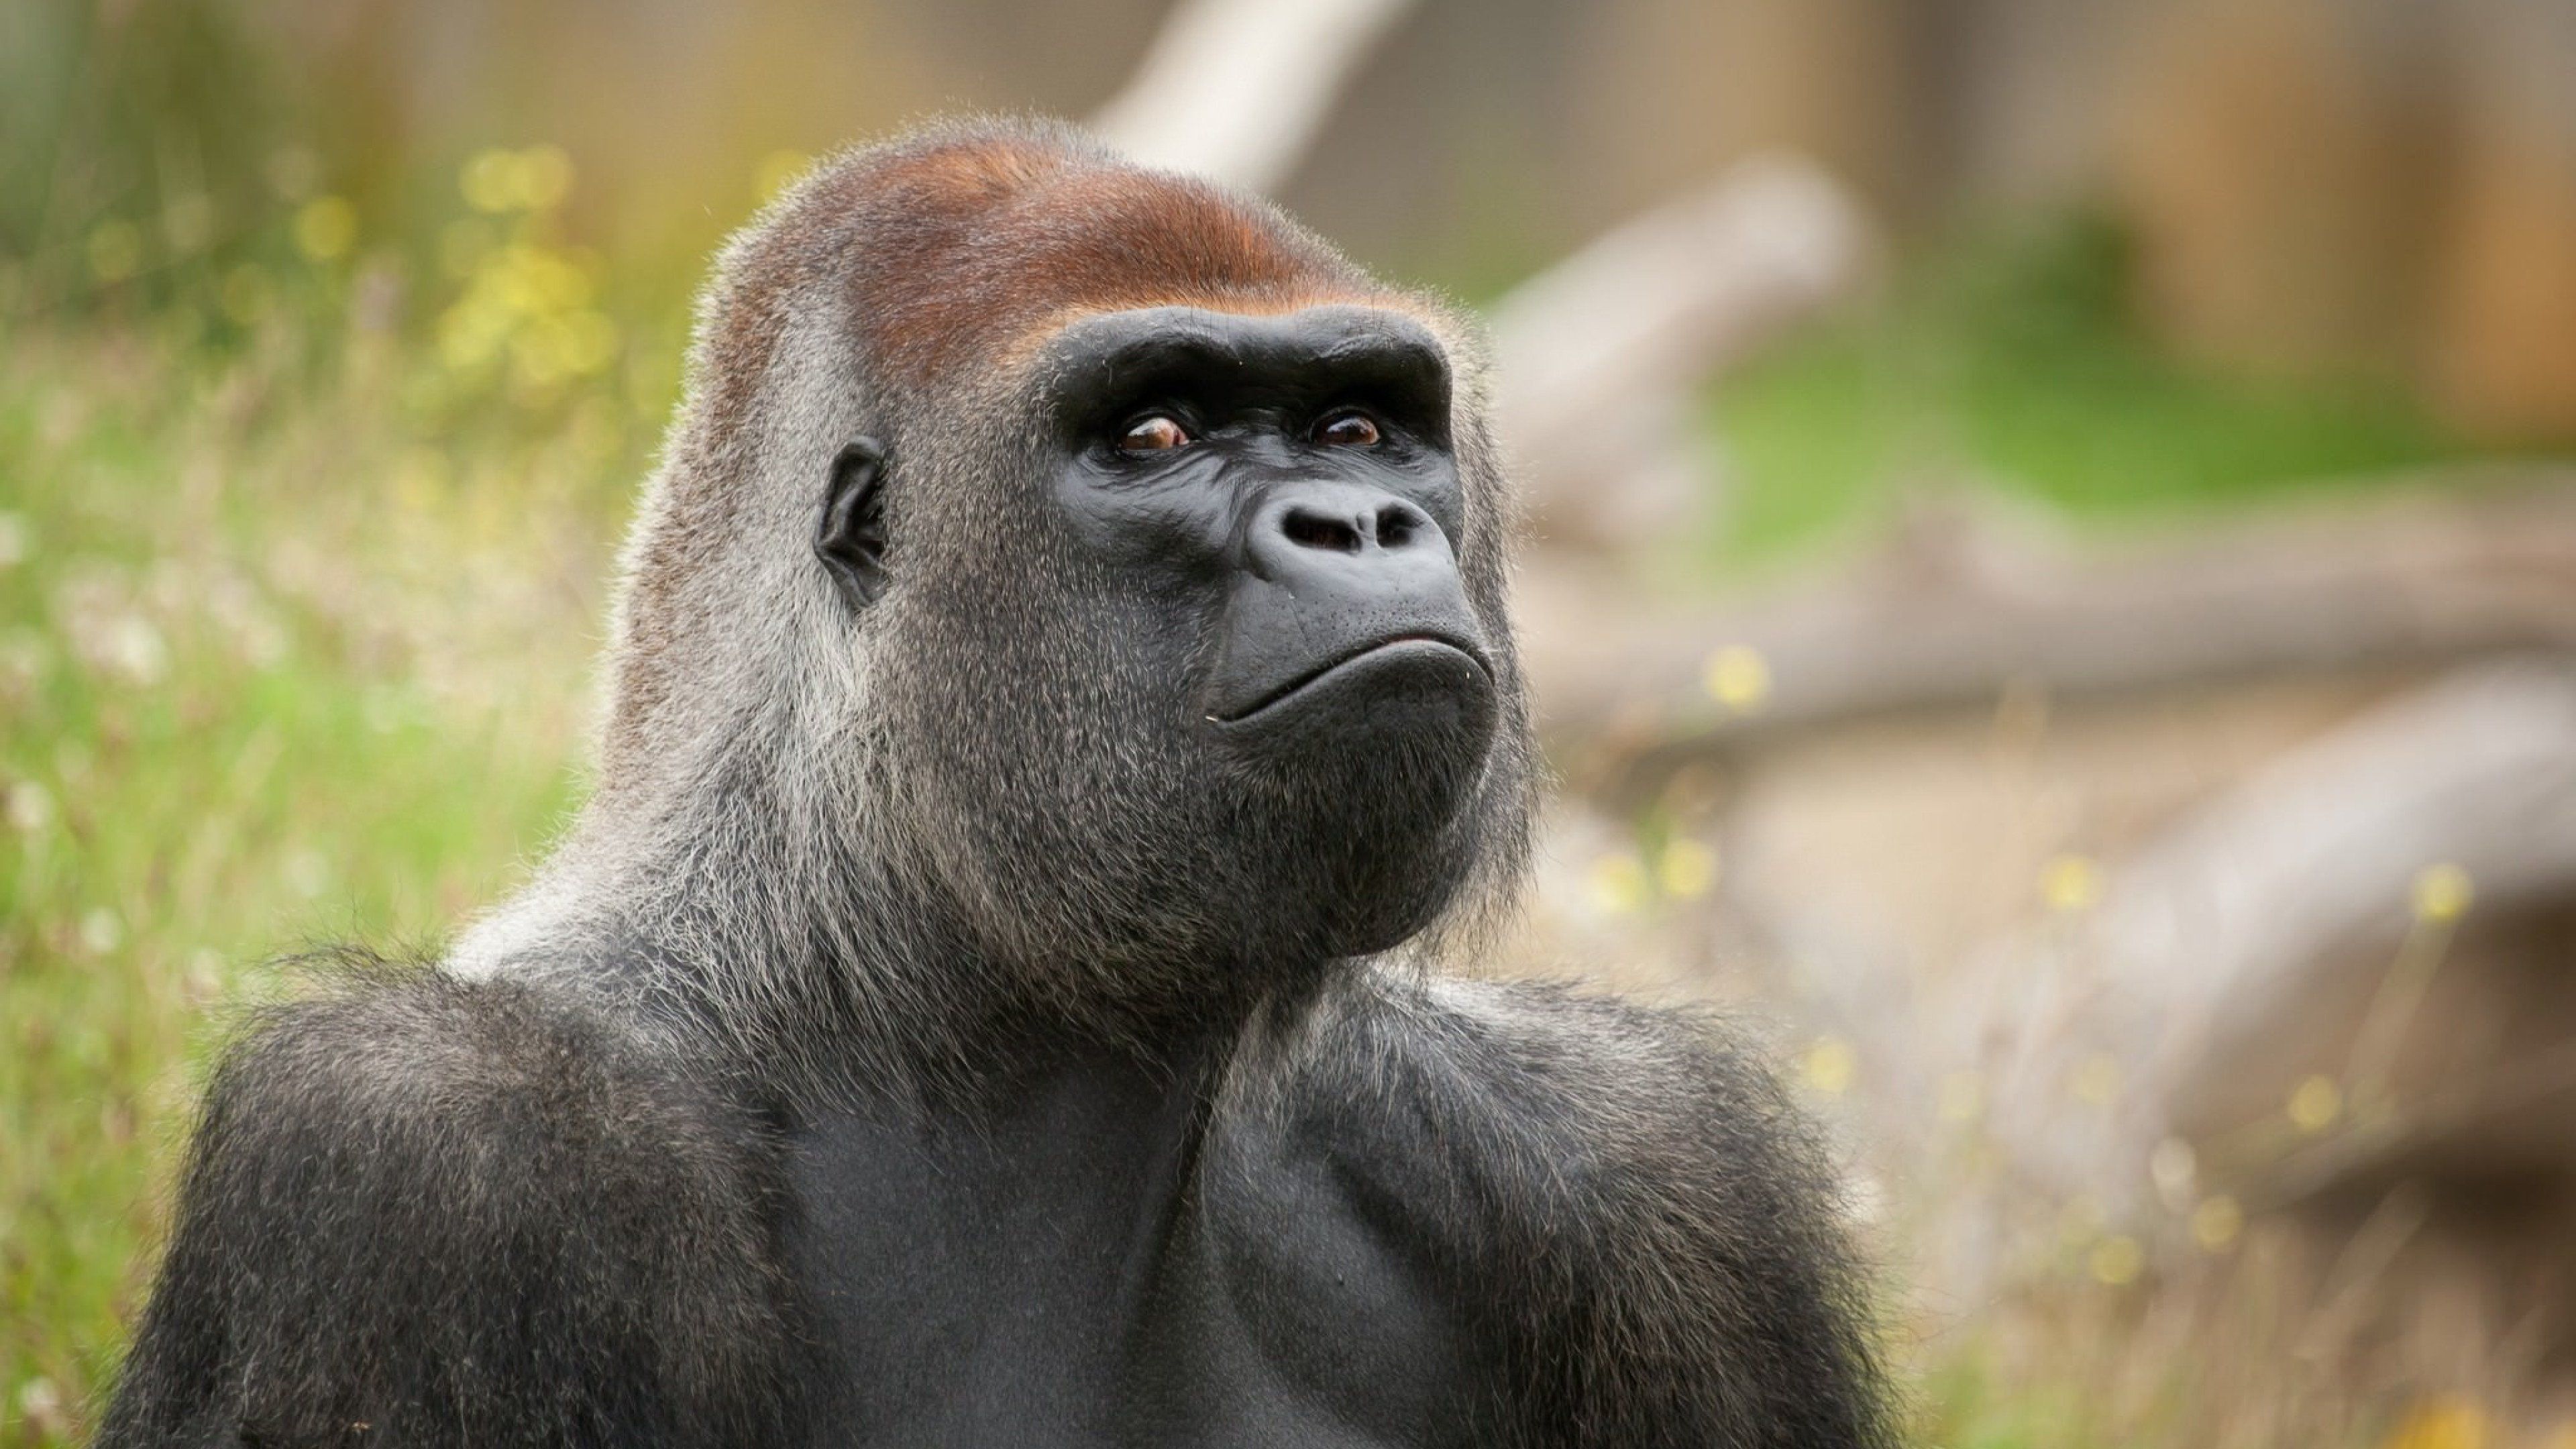 Gorilla 4K wallpaper for your desktop or mobile screen free and easy to download